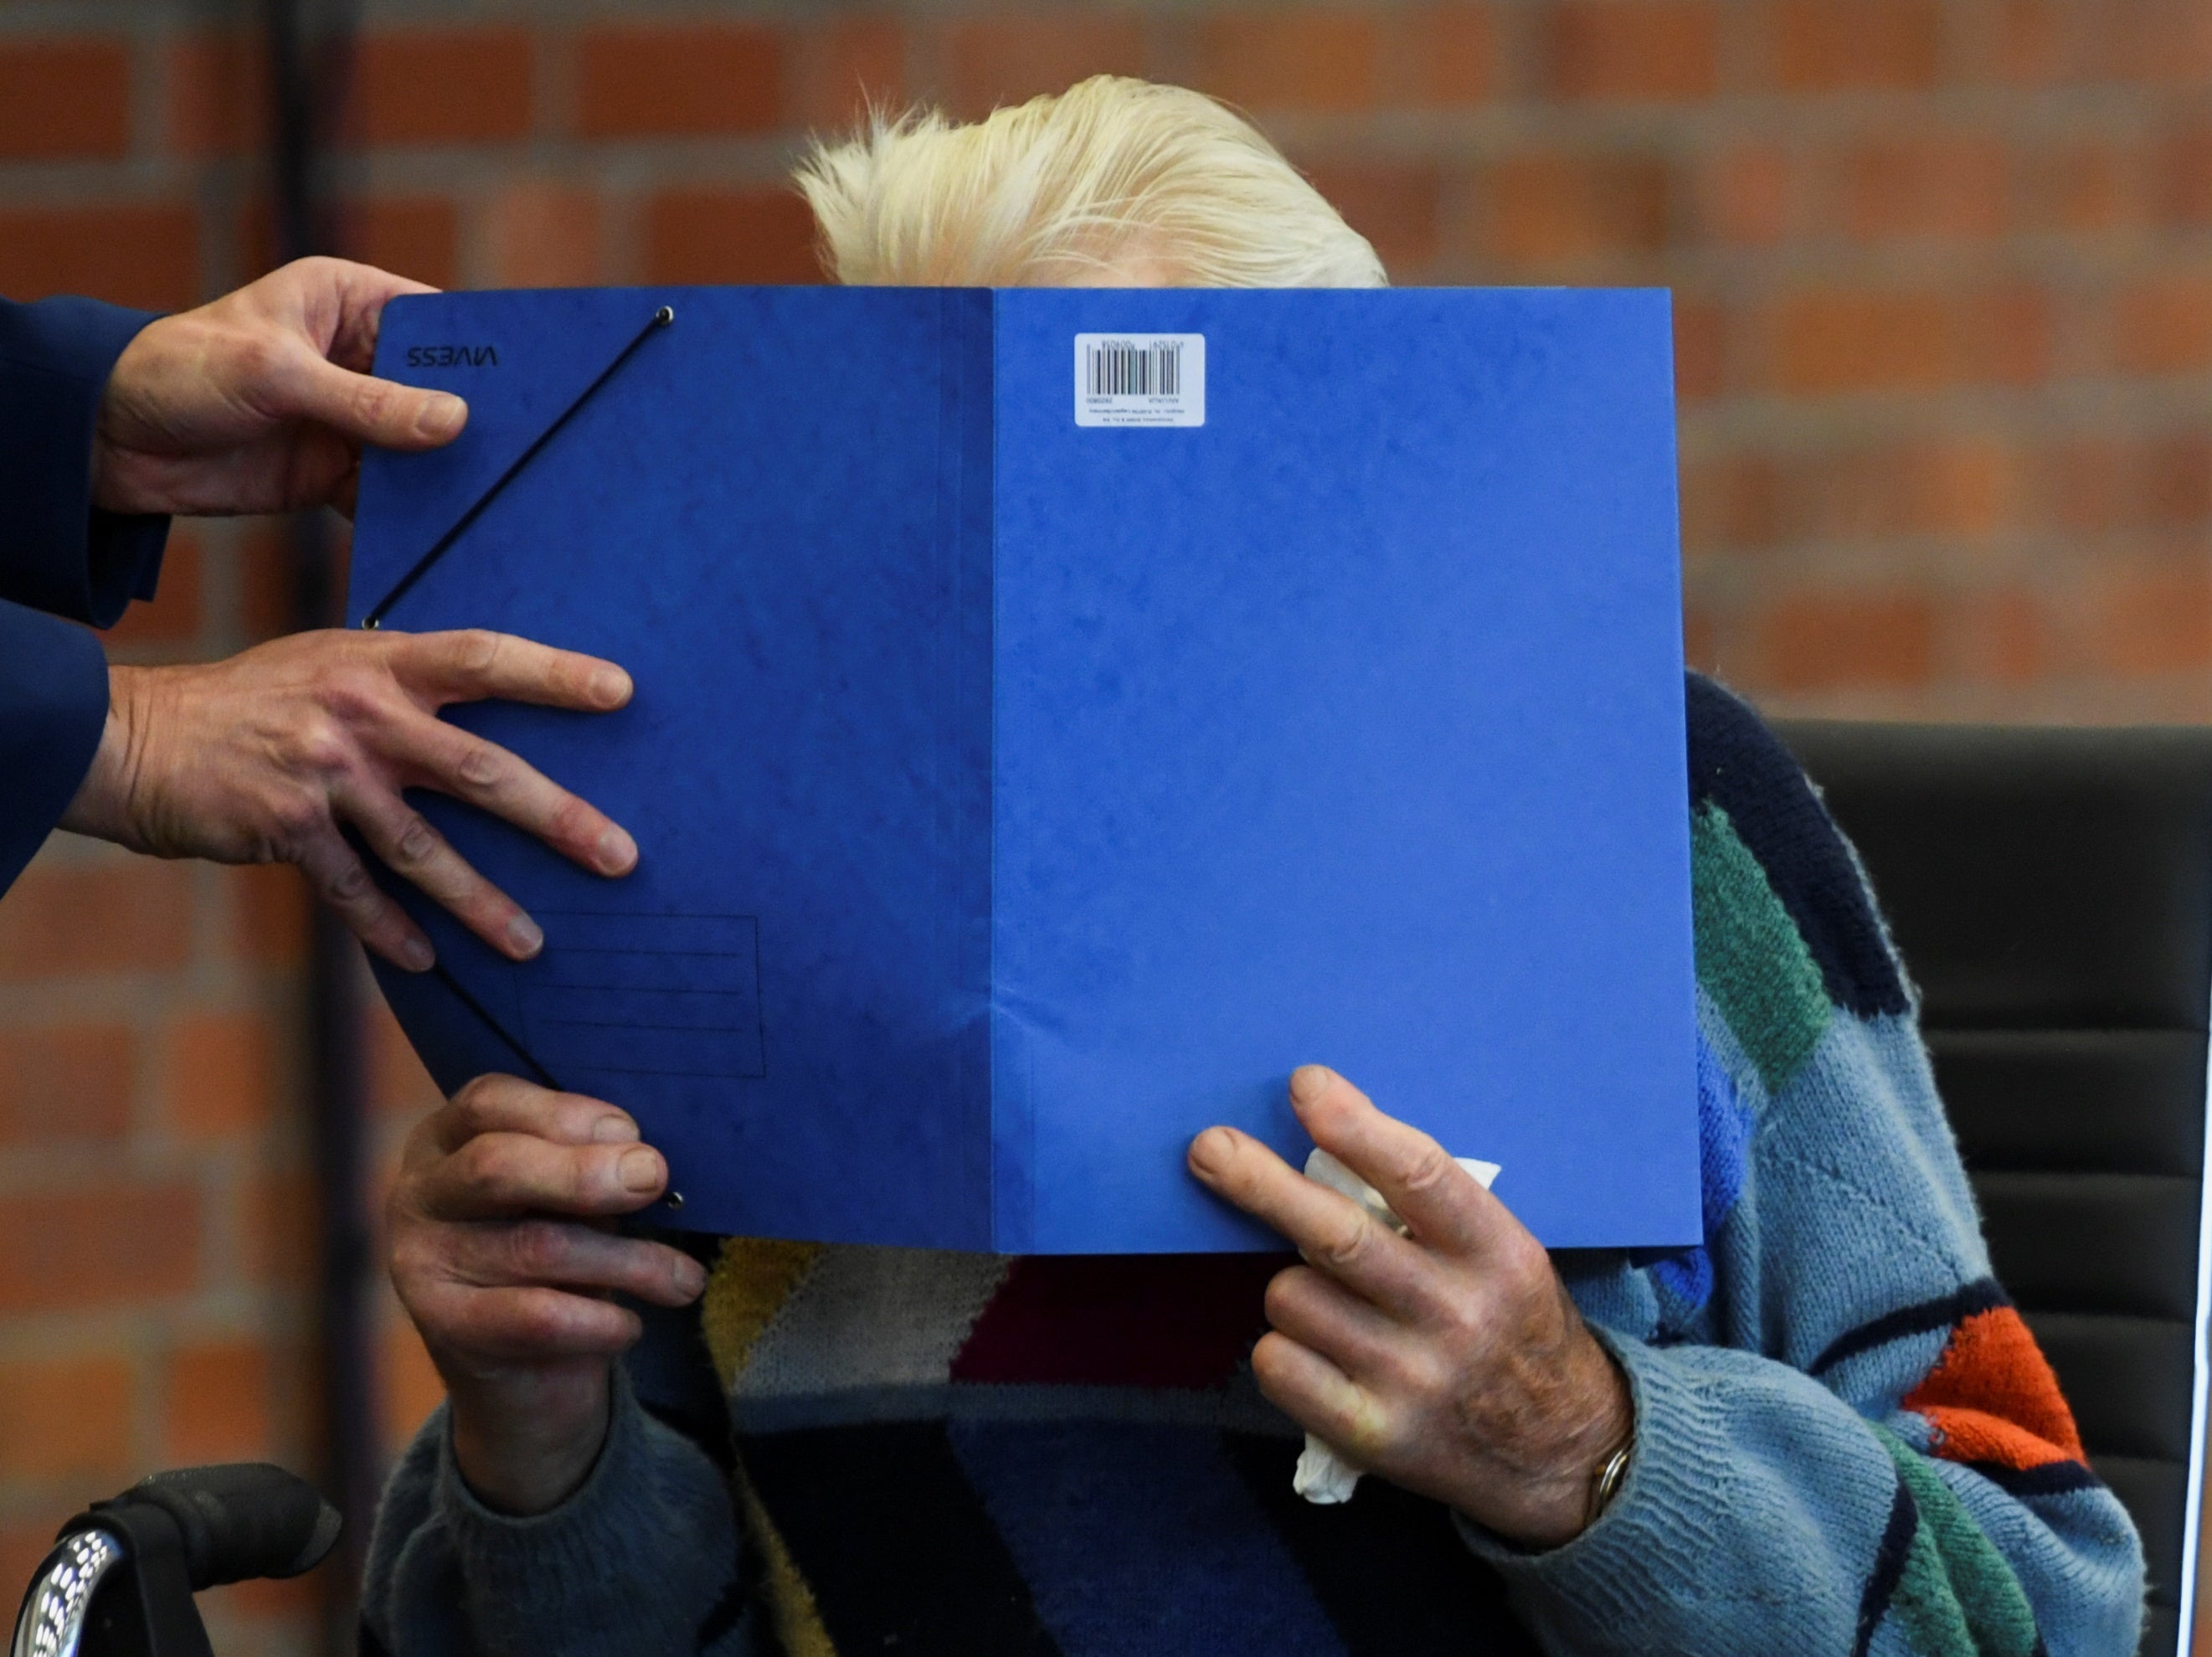 A 100-year-old former Nazi concentration camp guard has gone on trial in Germany